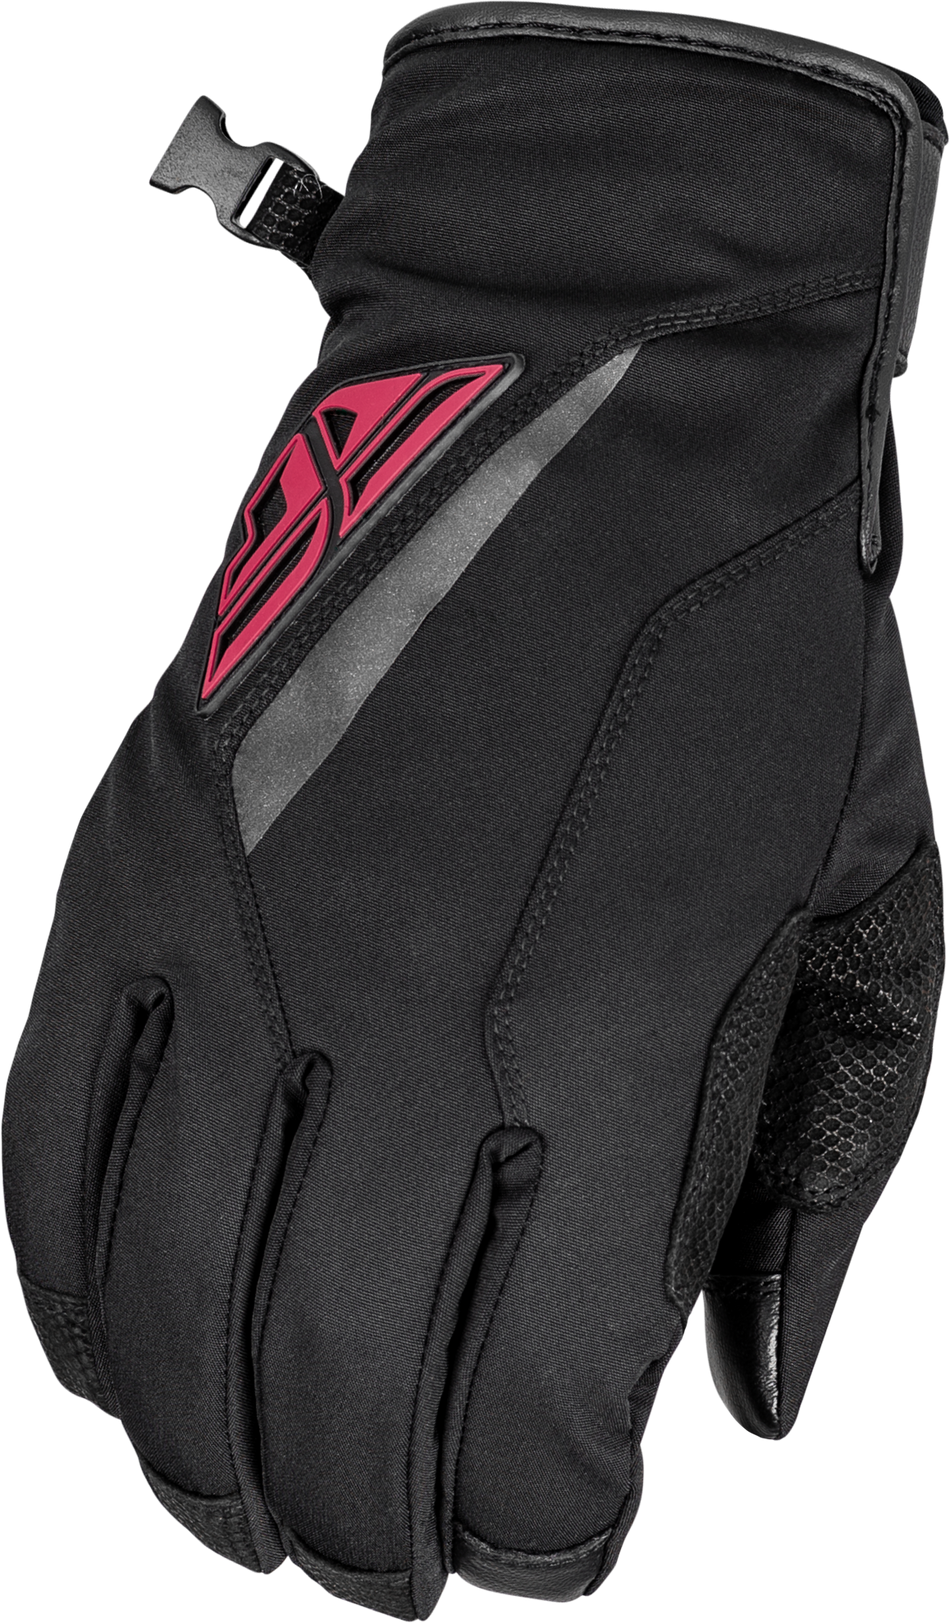 FLY RACING Title Long Gloves Black/Pink Lg 371-0614L